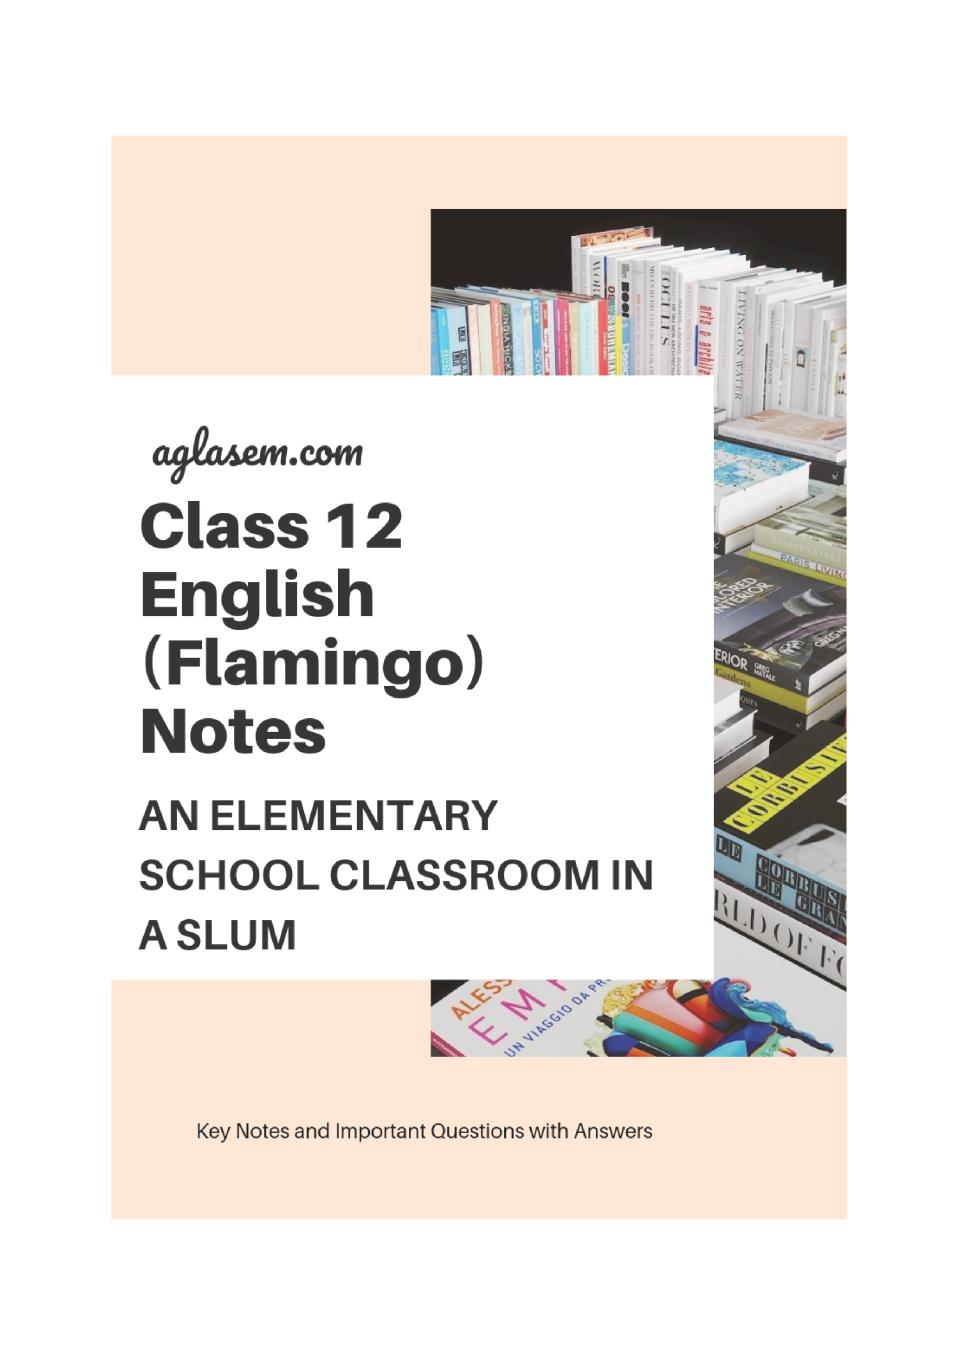 Class 12 English Flamingo Notes For An Elementary School Classroom In a Slum - Page 1